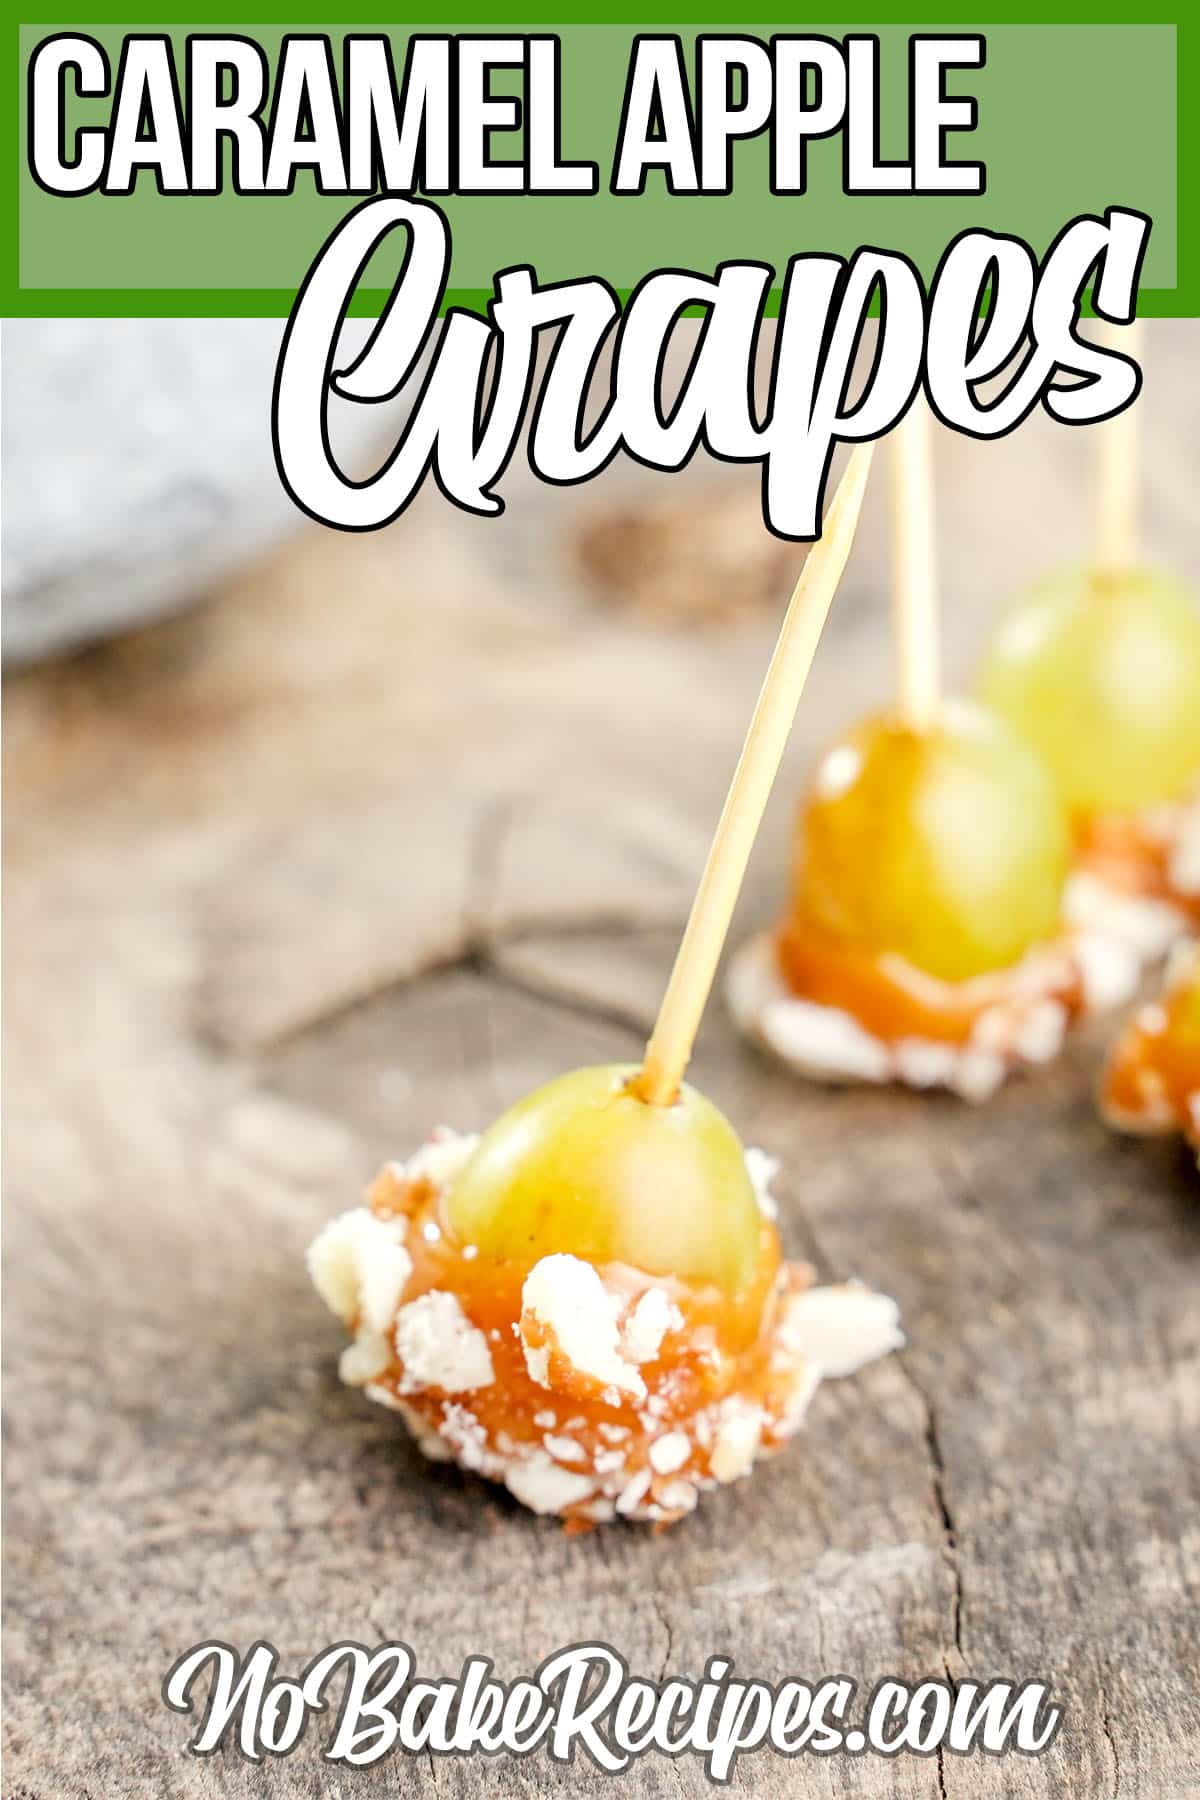 close up of caramel covered grapes with text which reads Caramel Apple Grapes